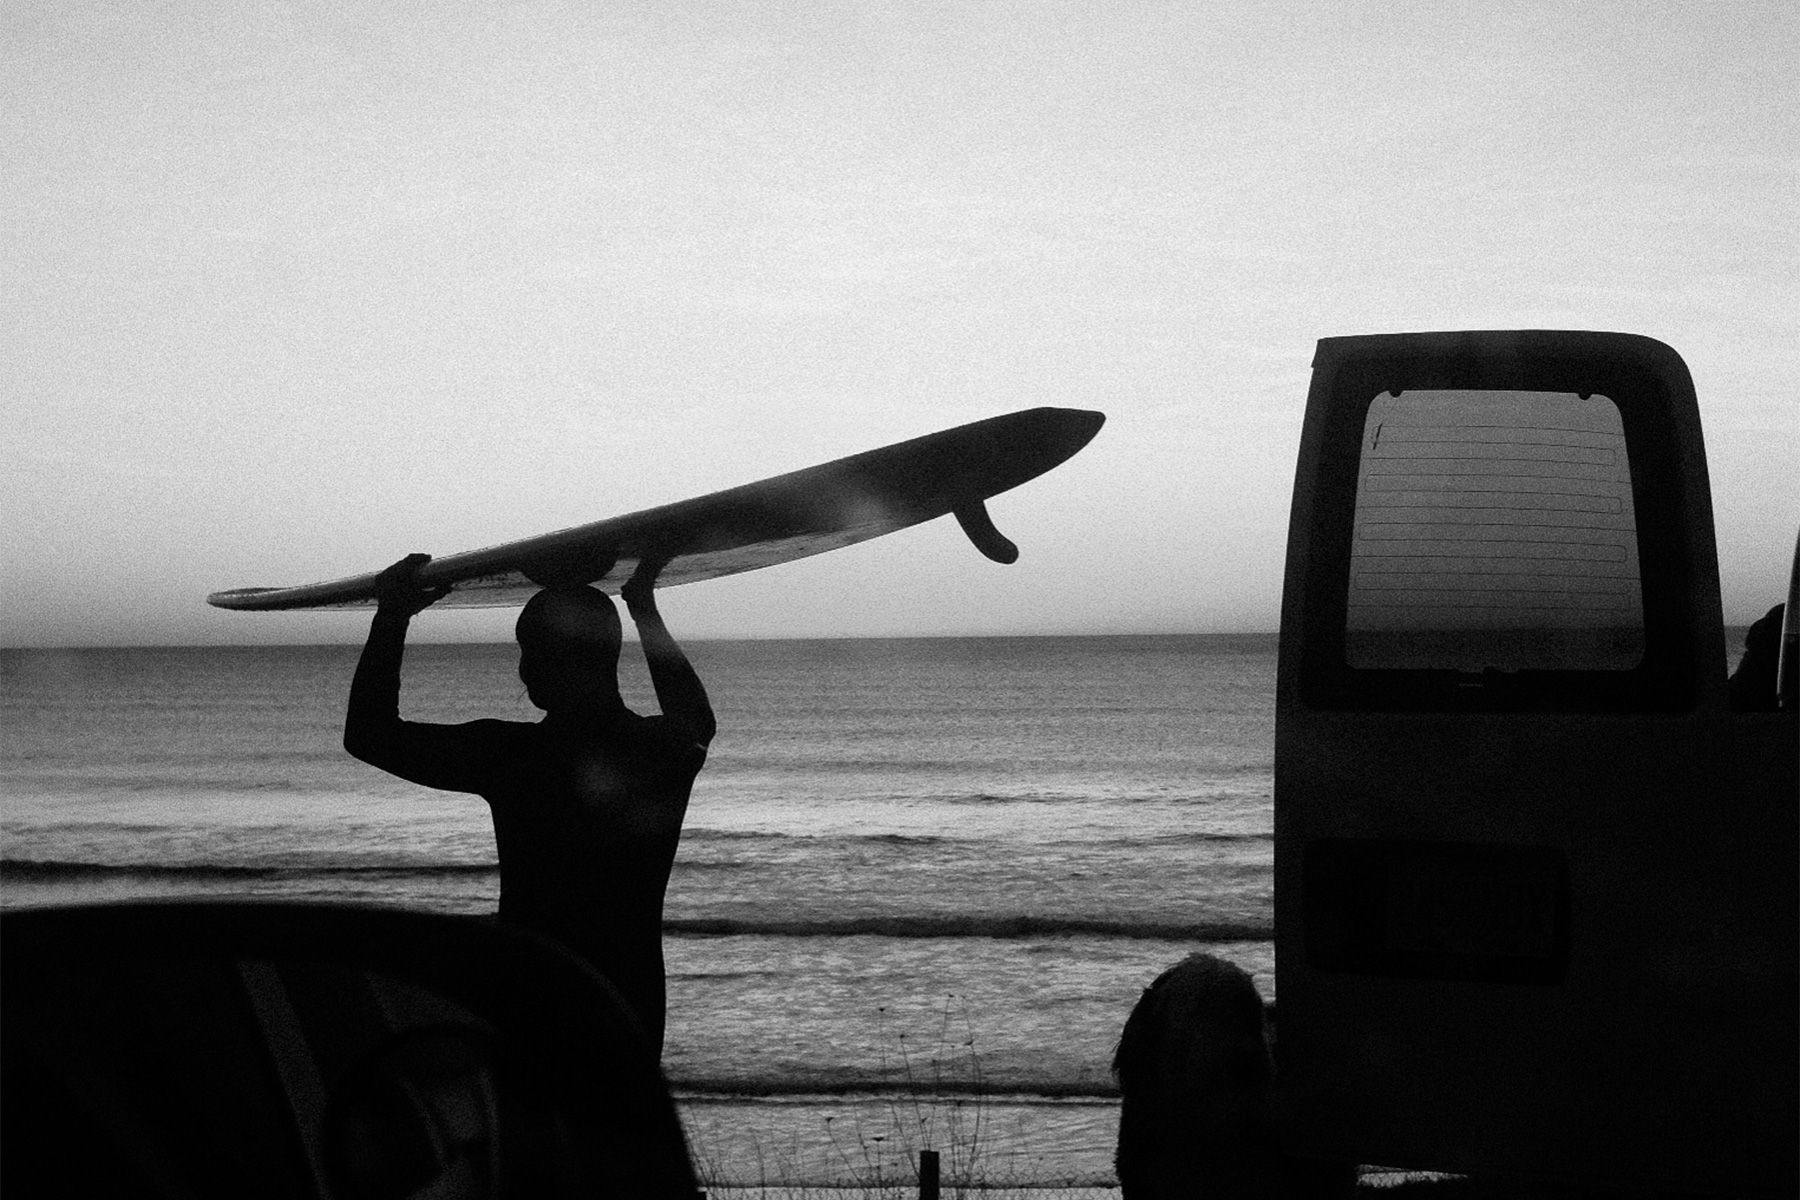 silhouette of a surfer carrying a longboard on their head past an open van door